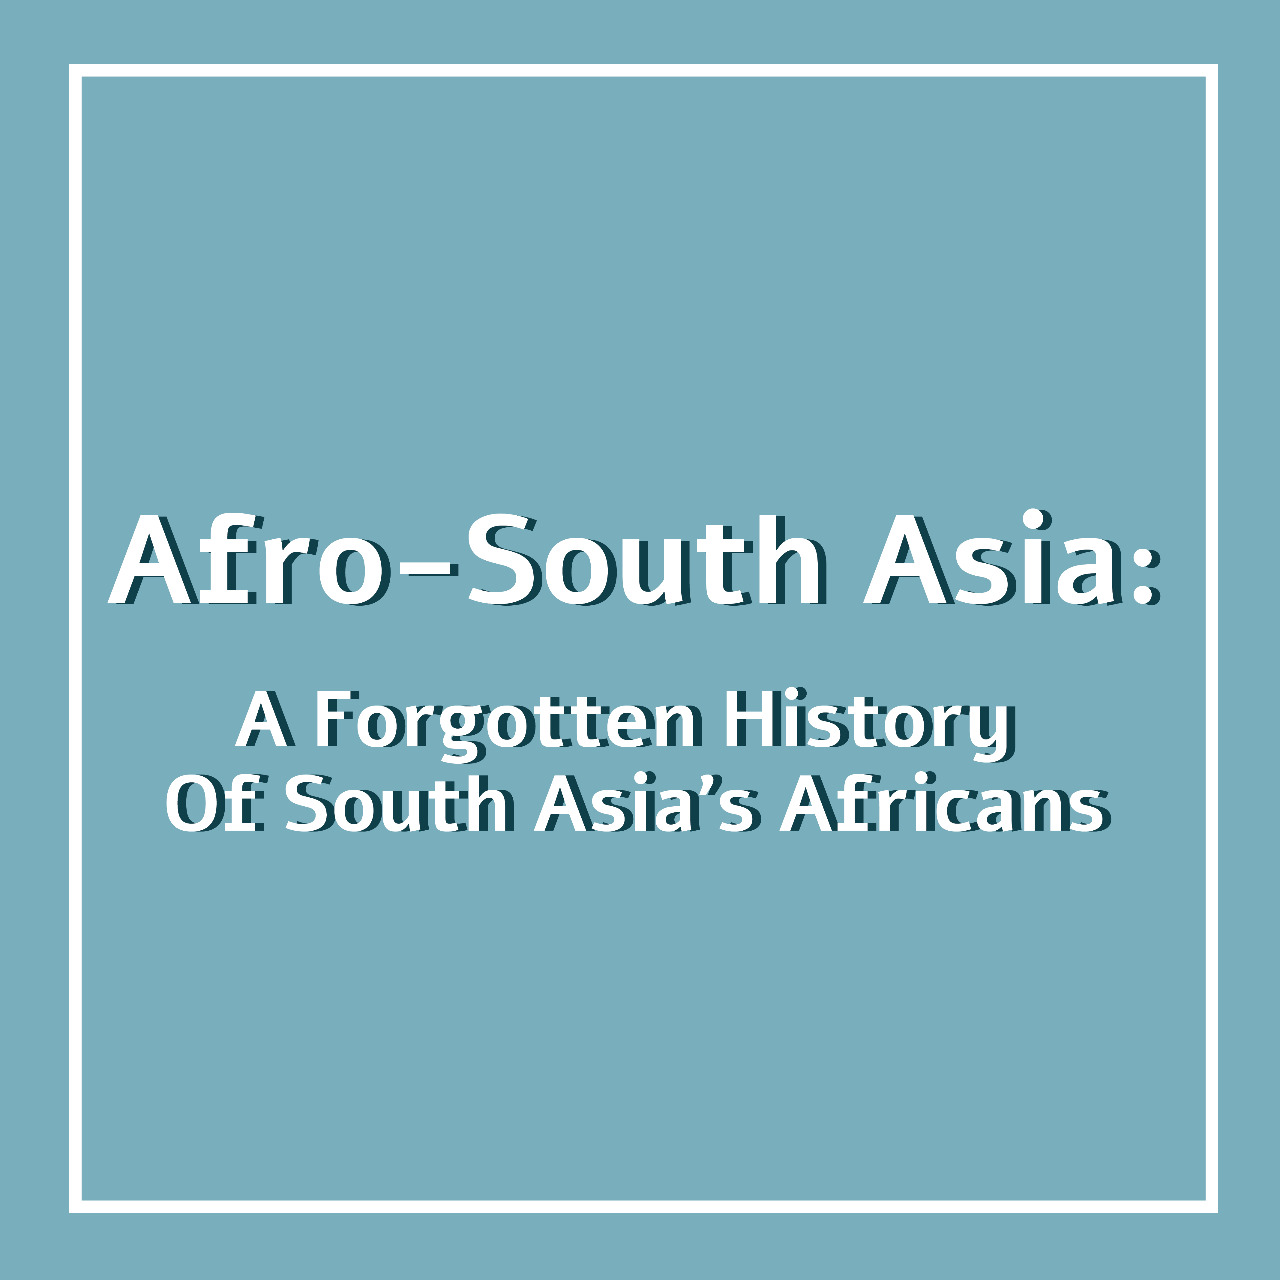 Afro-South Asia: A Forgotten History Of South Asia’s Africans